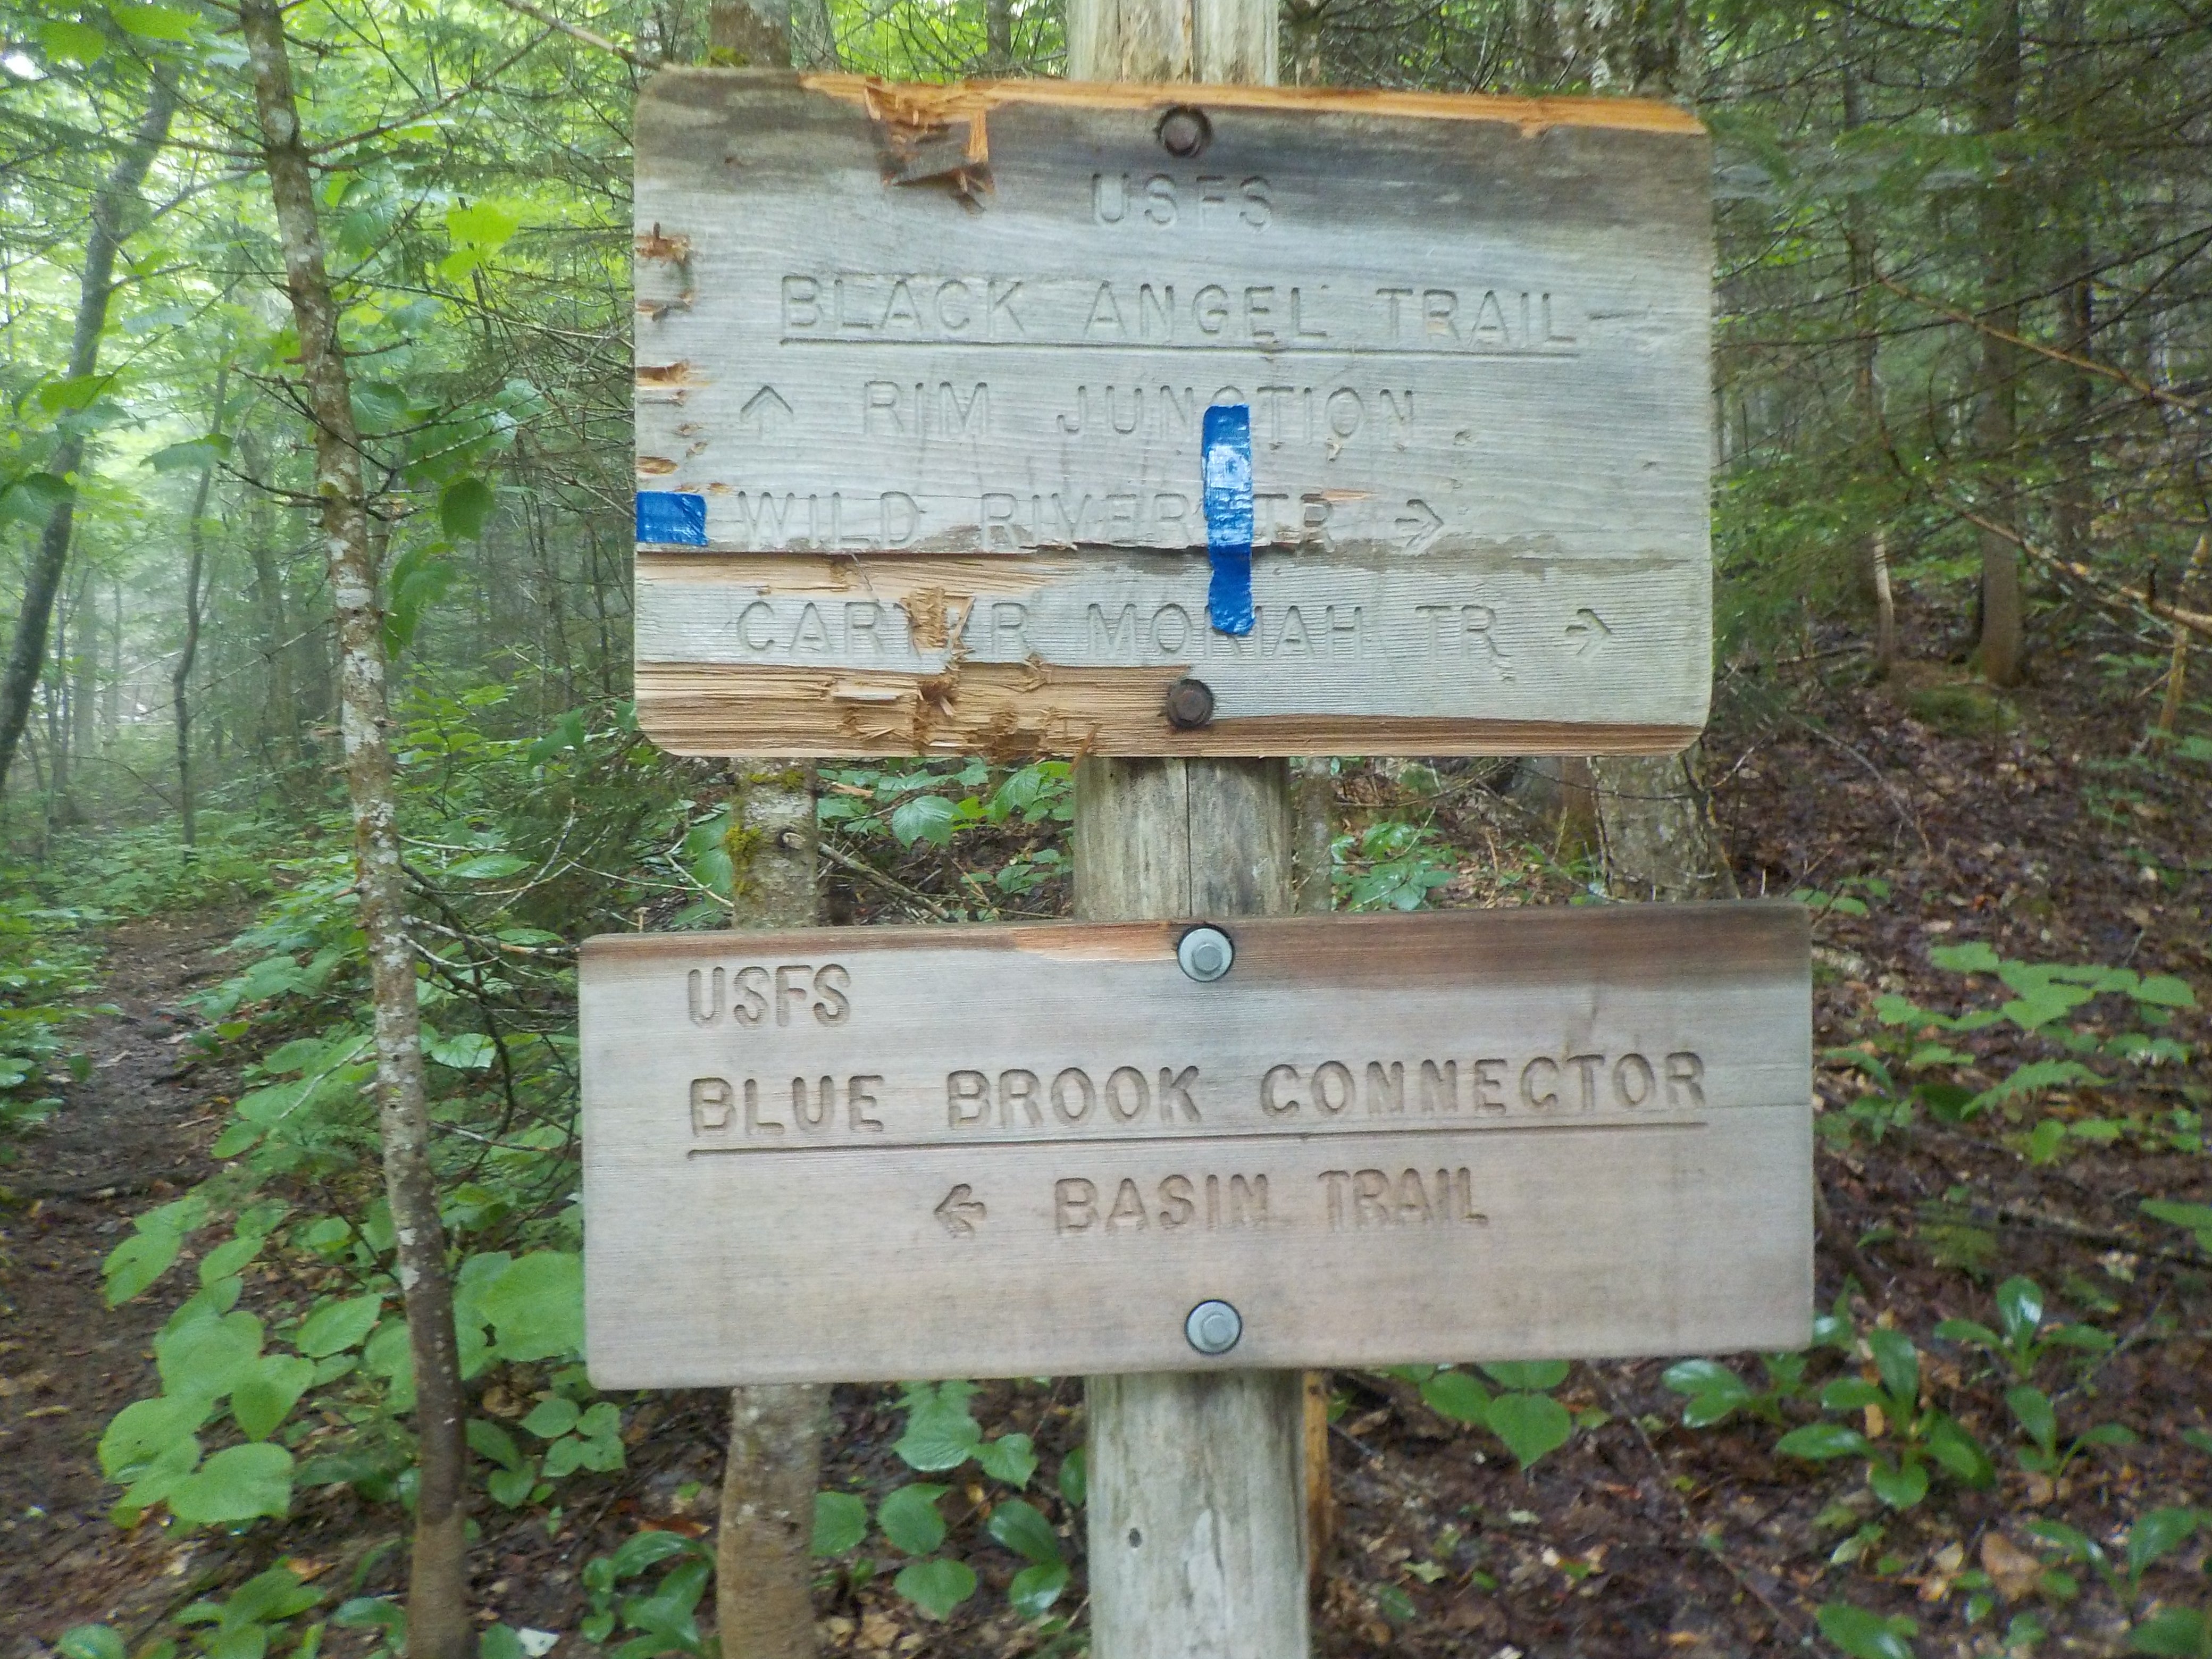 Camper submitted image from Blue Brook Tent Site - 1